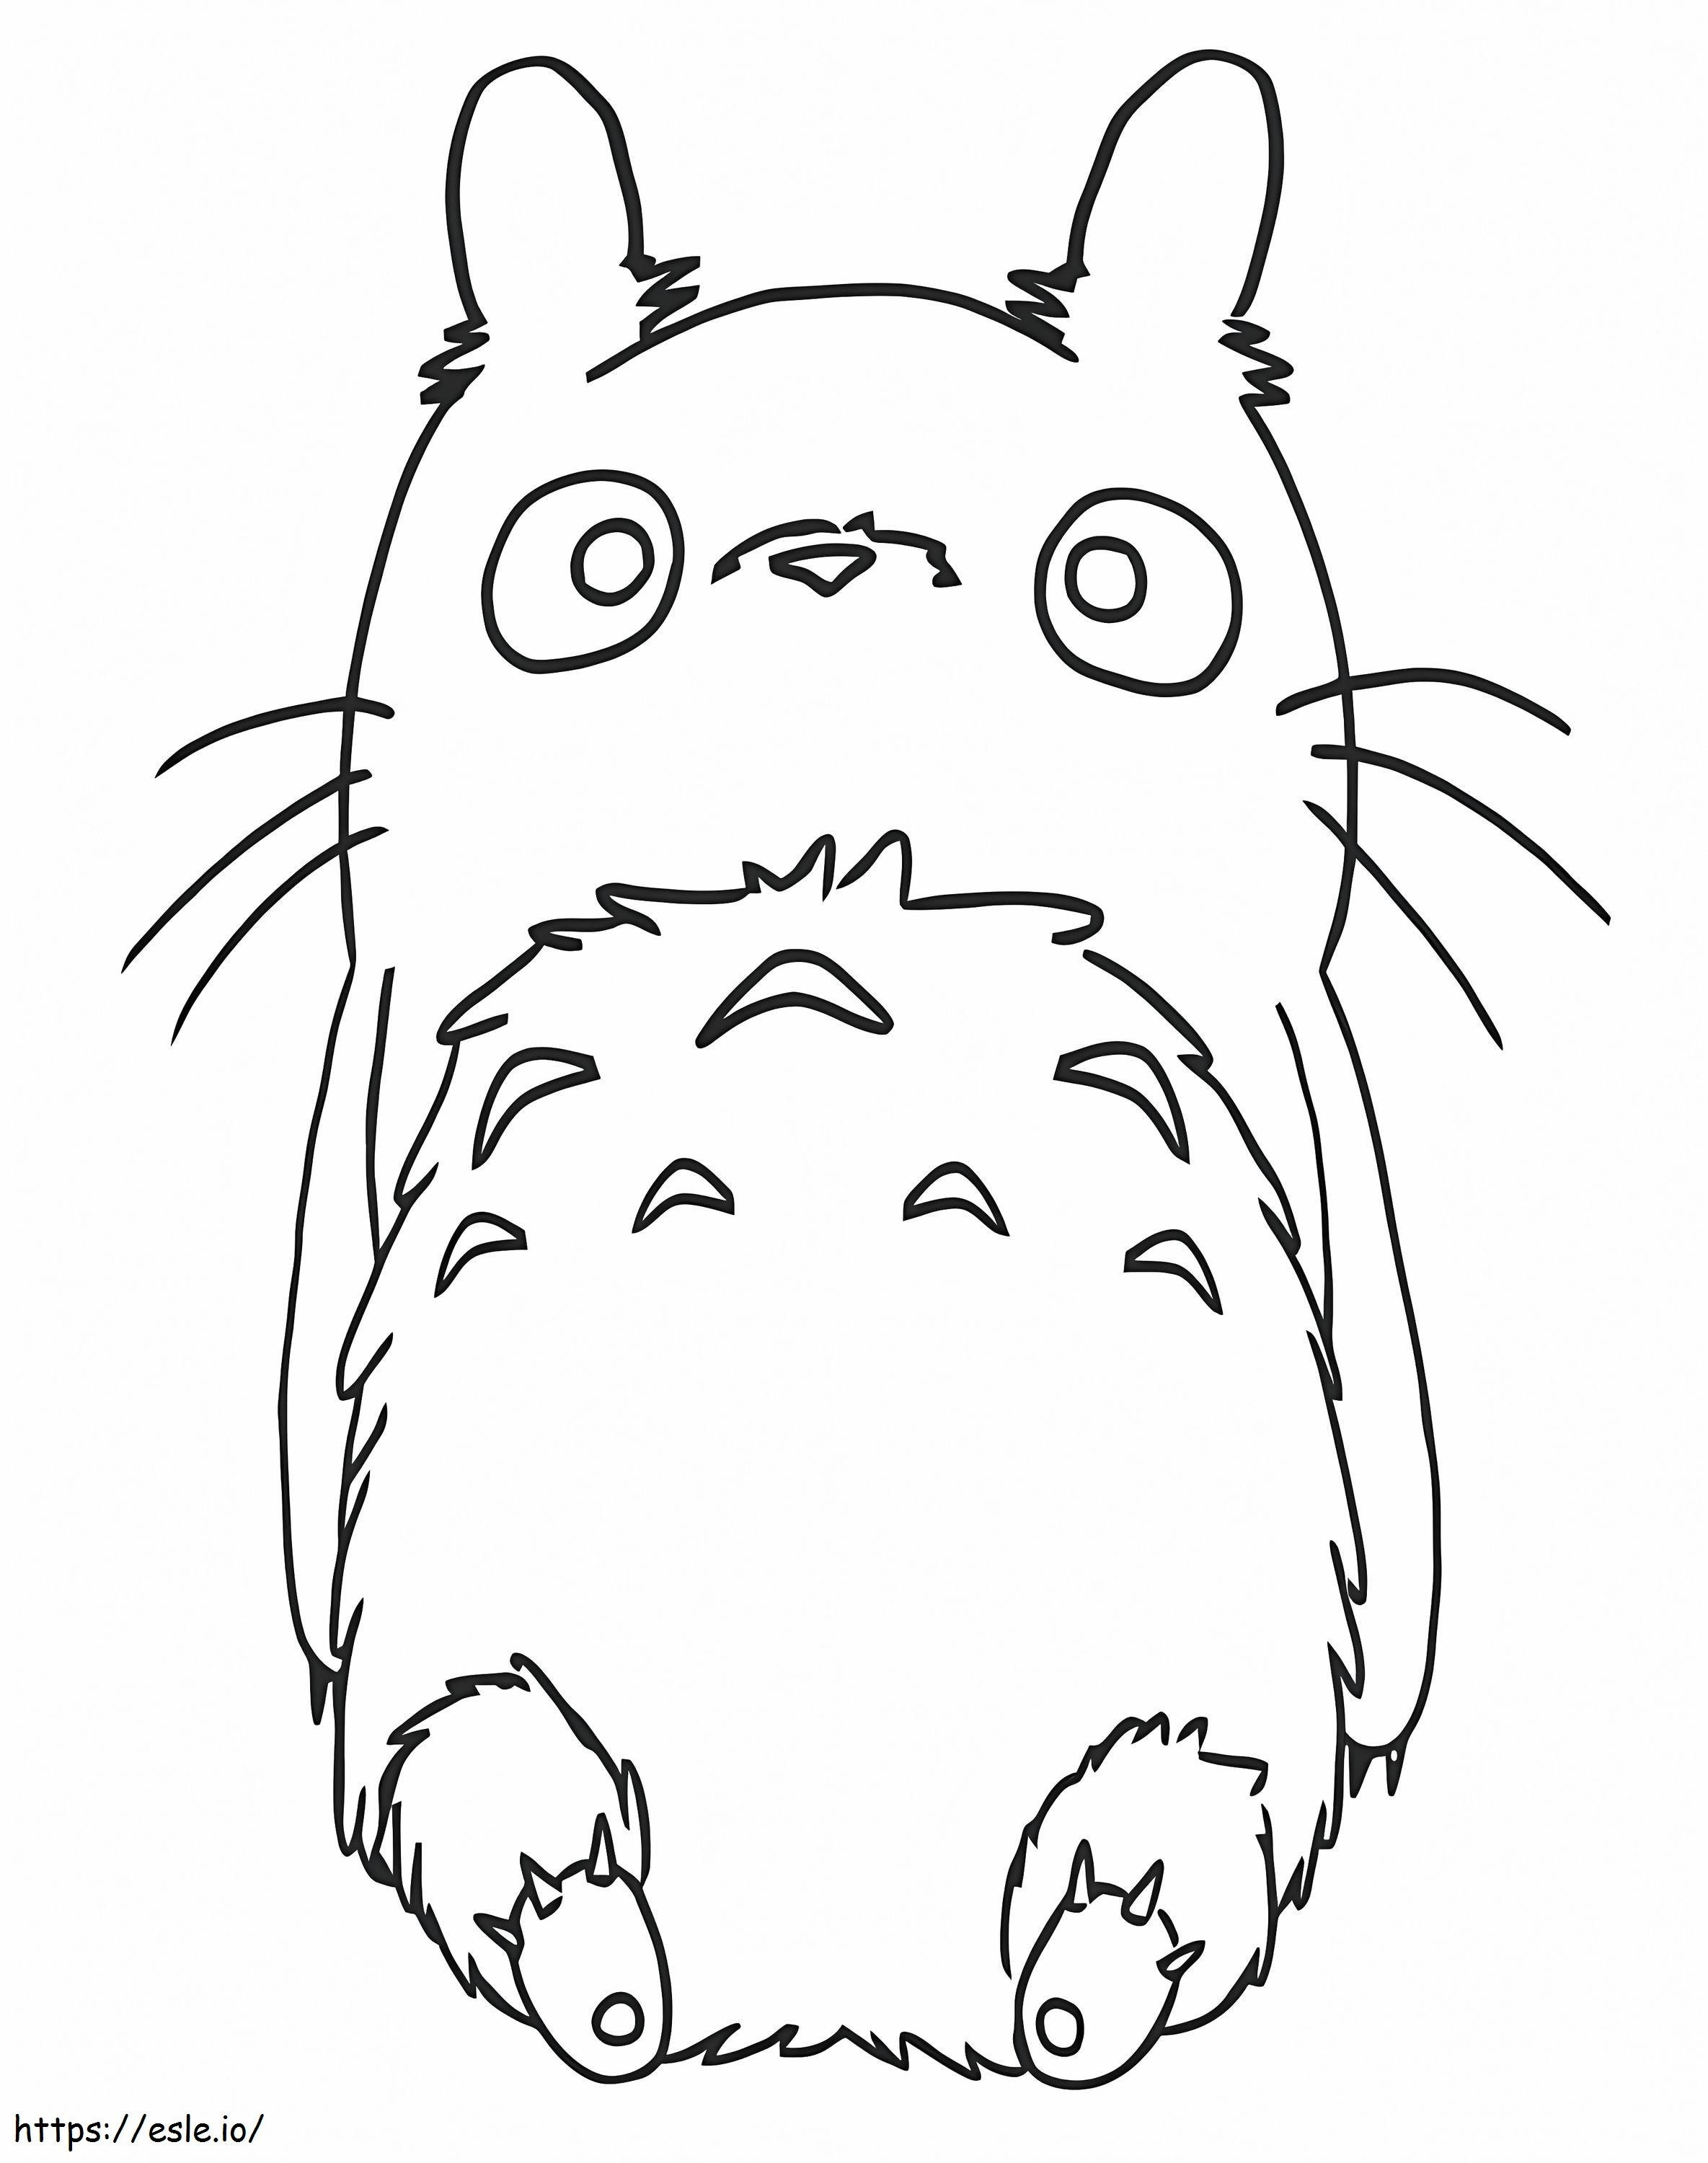 Cute Totoro 1 coloring page